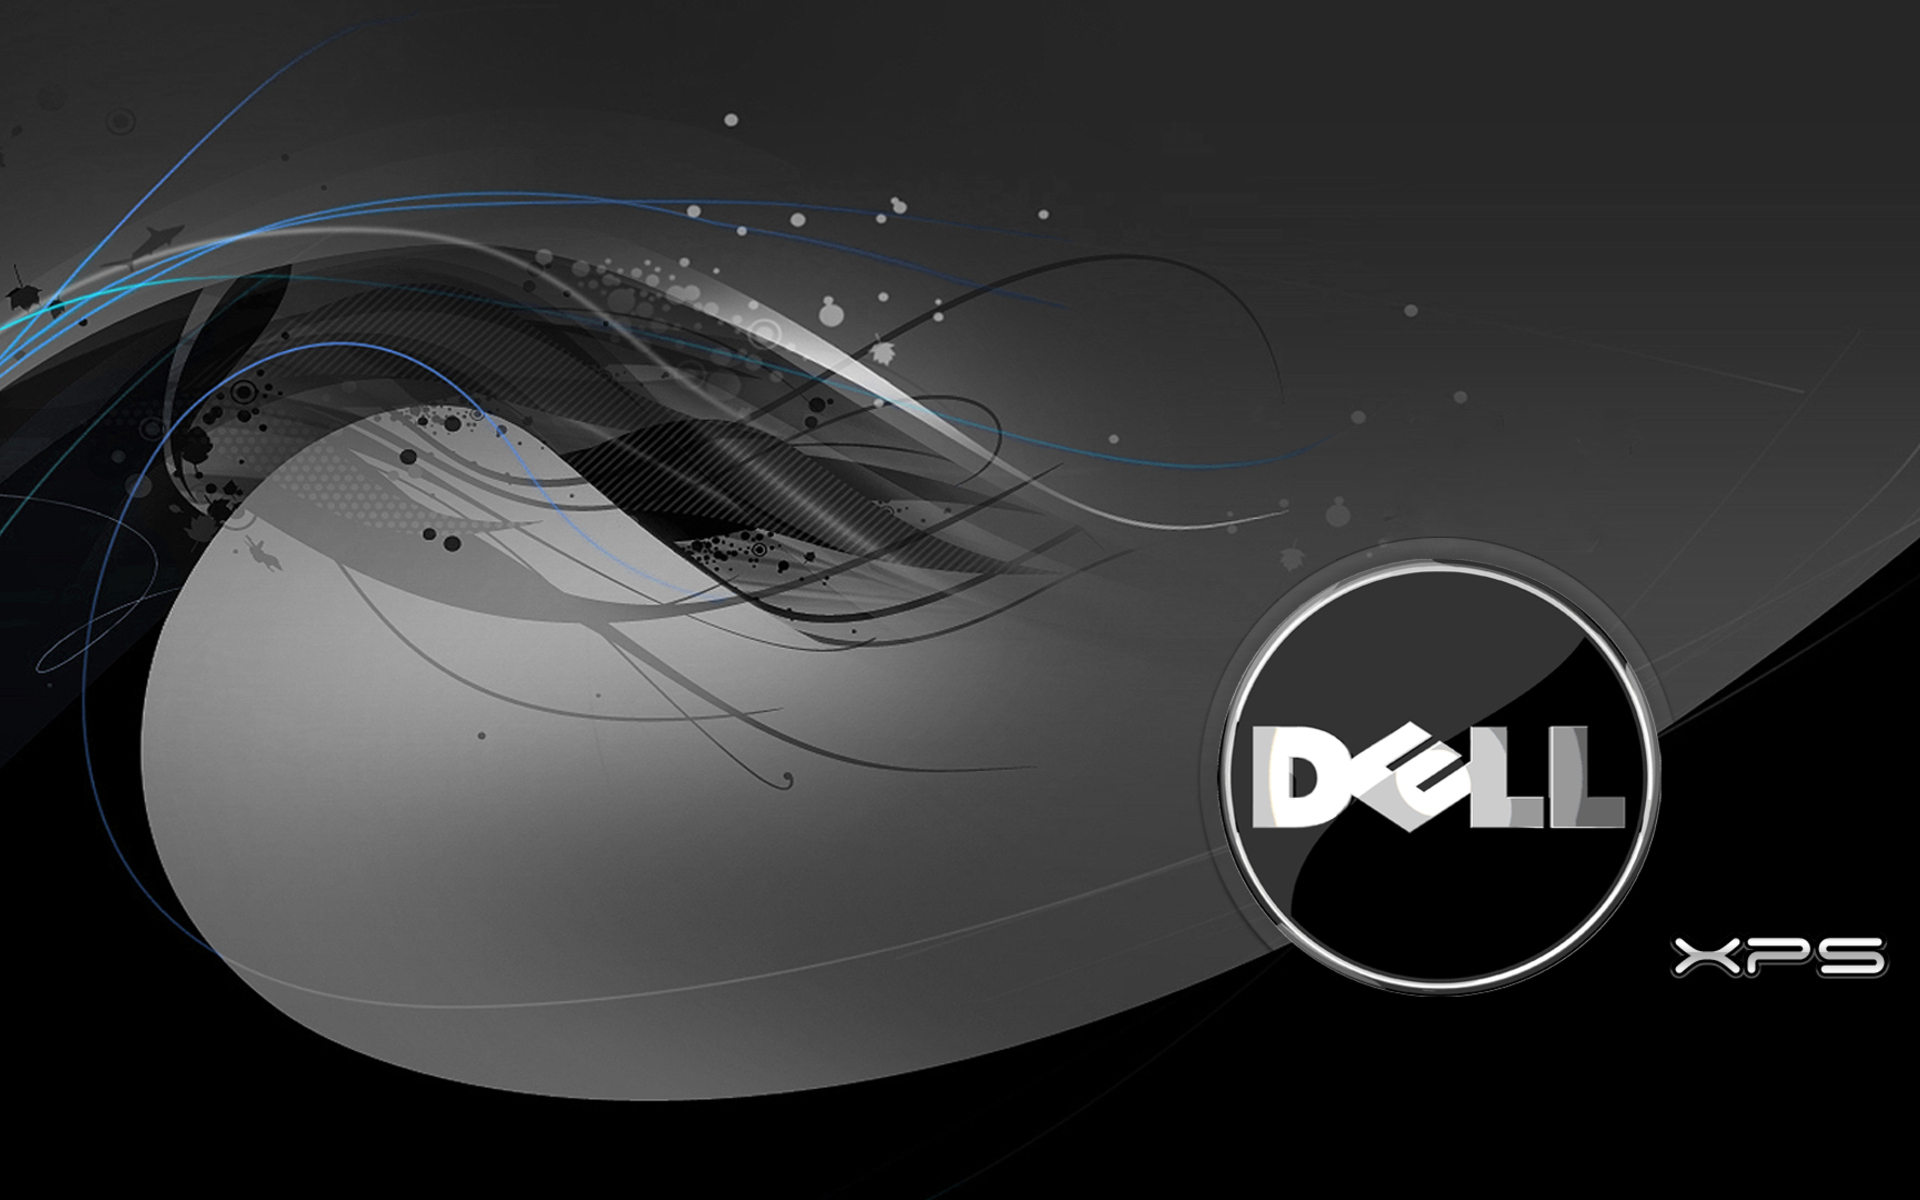 dell_wallpaper_bw_two_by_coolcat21-1920x1200.jpg